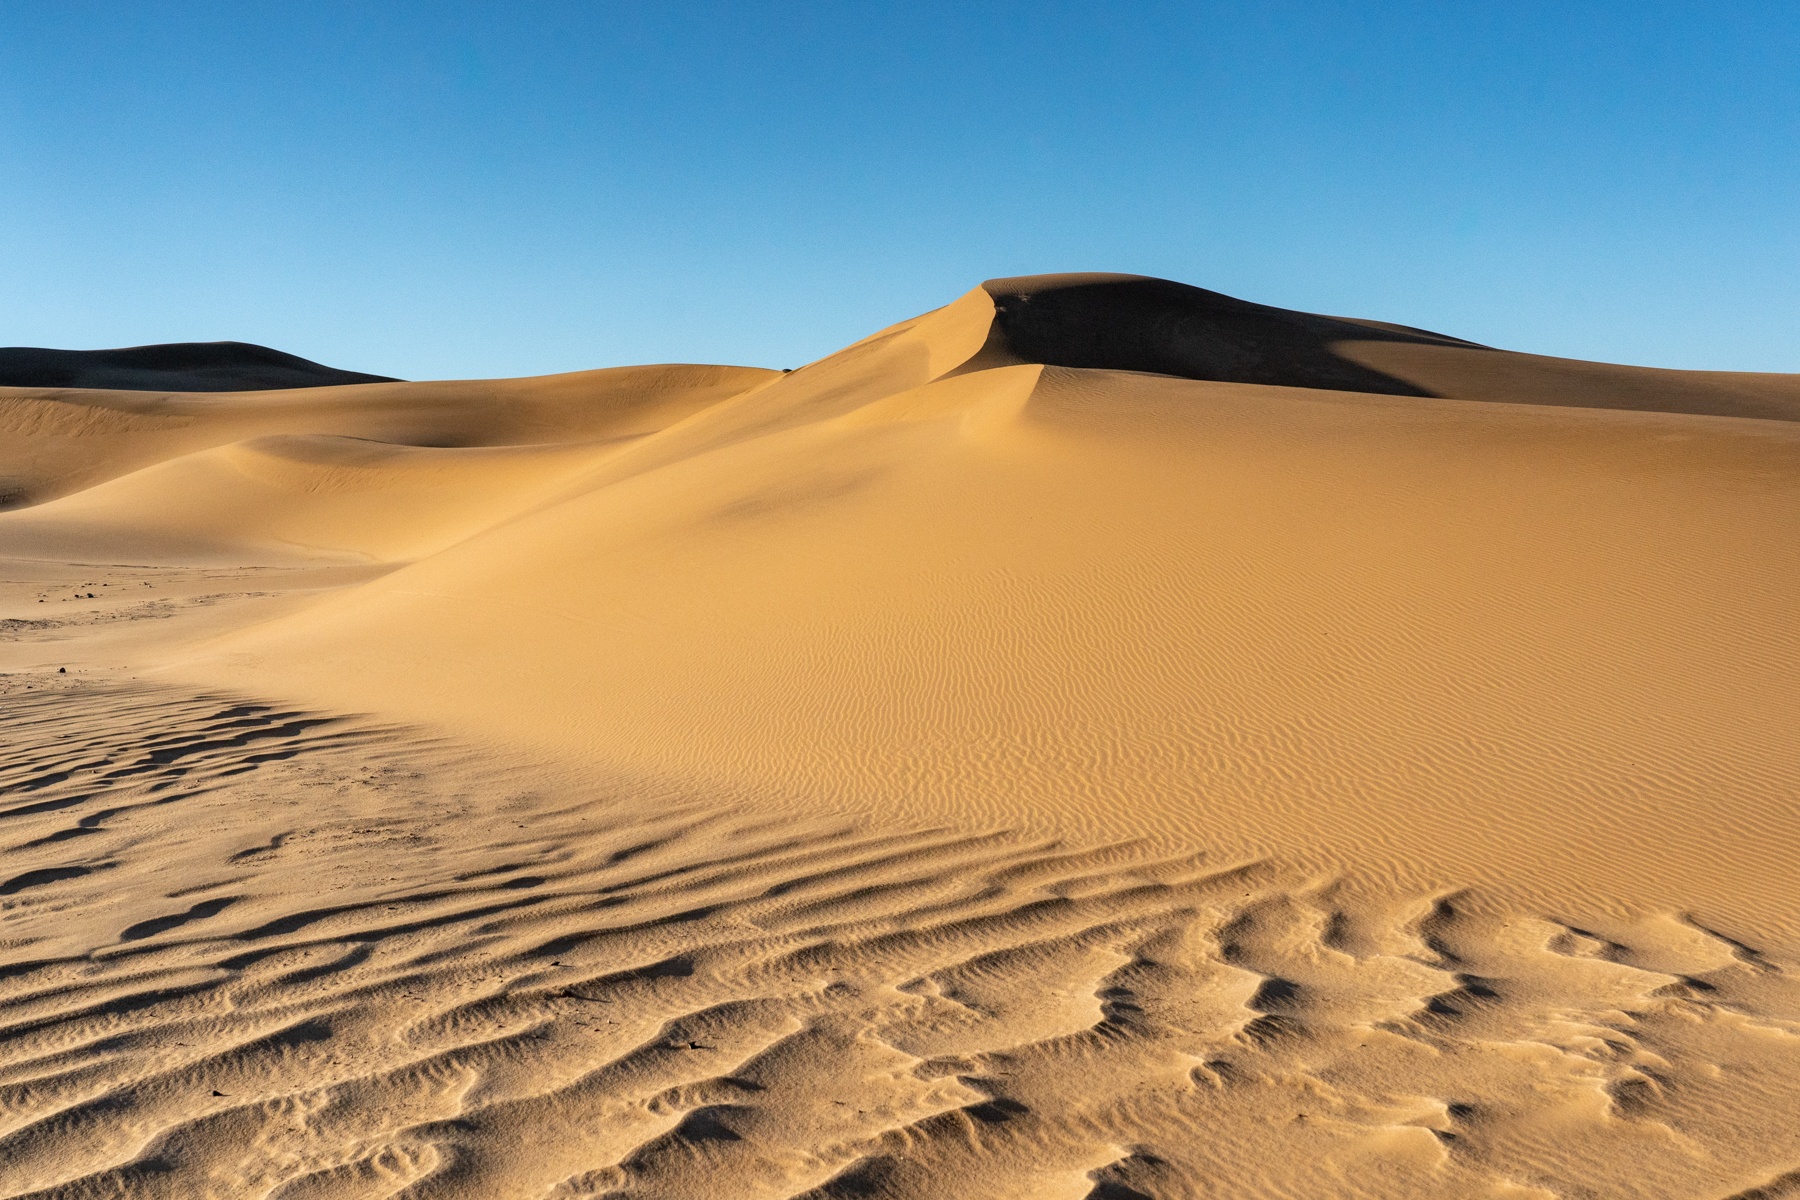 In Namibia's Dorob National Park, the dunes are gorgeous in the early light